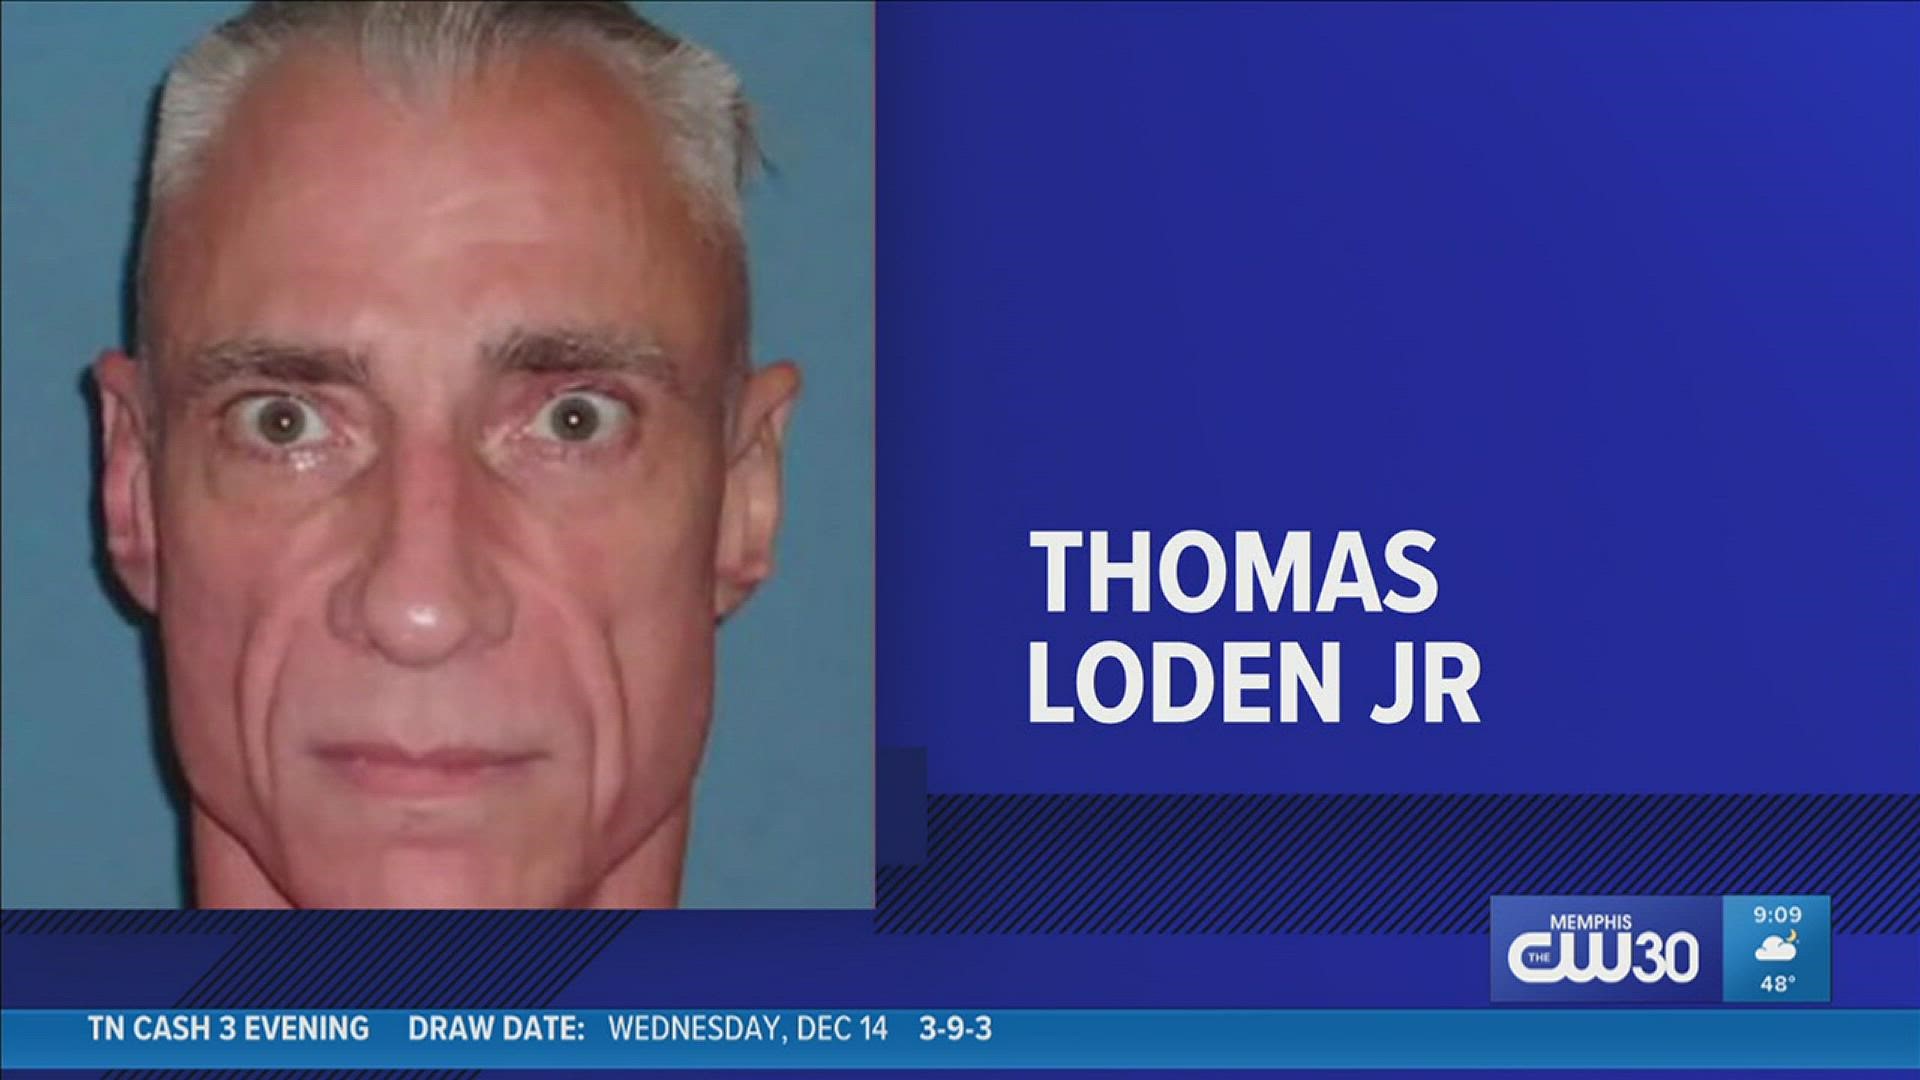 Officials say 58-year-old Thomas Edwin Loden Jr. was pronounced dead at 6:12 p.m. Wednesday.